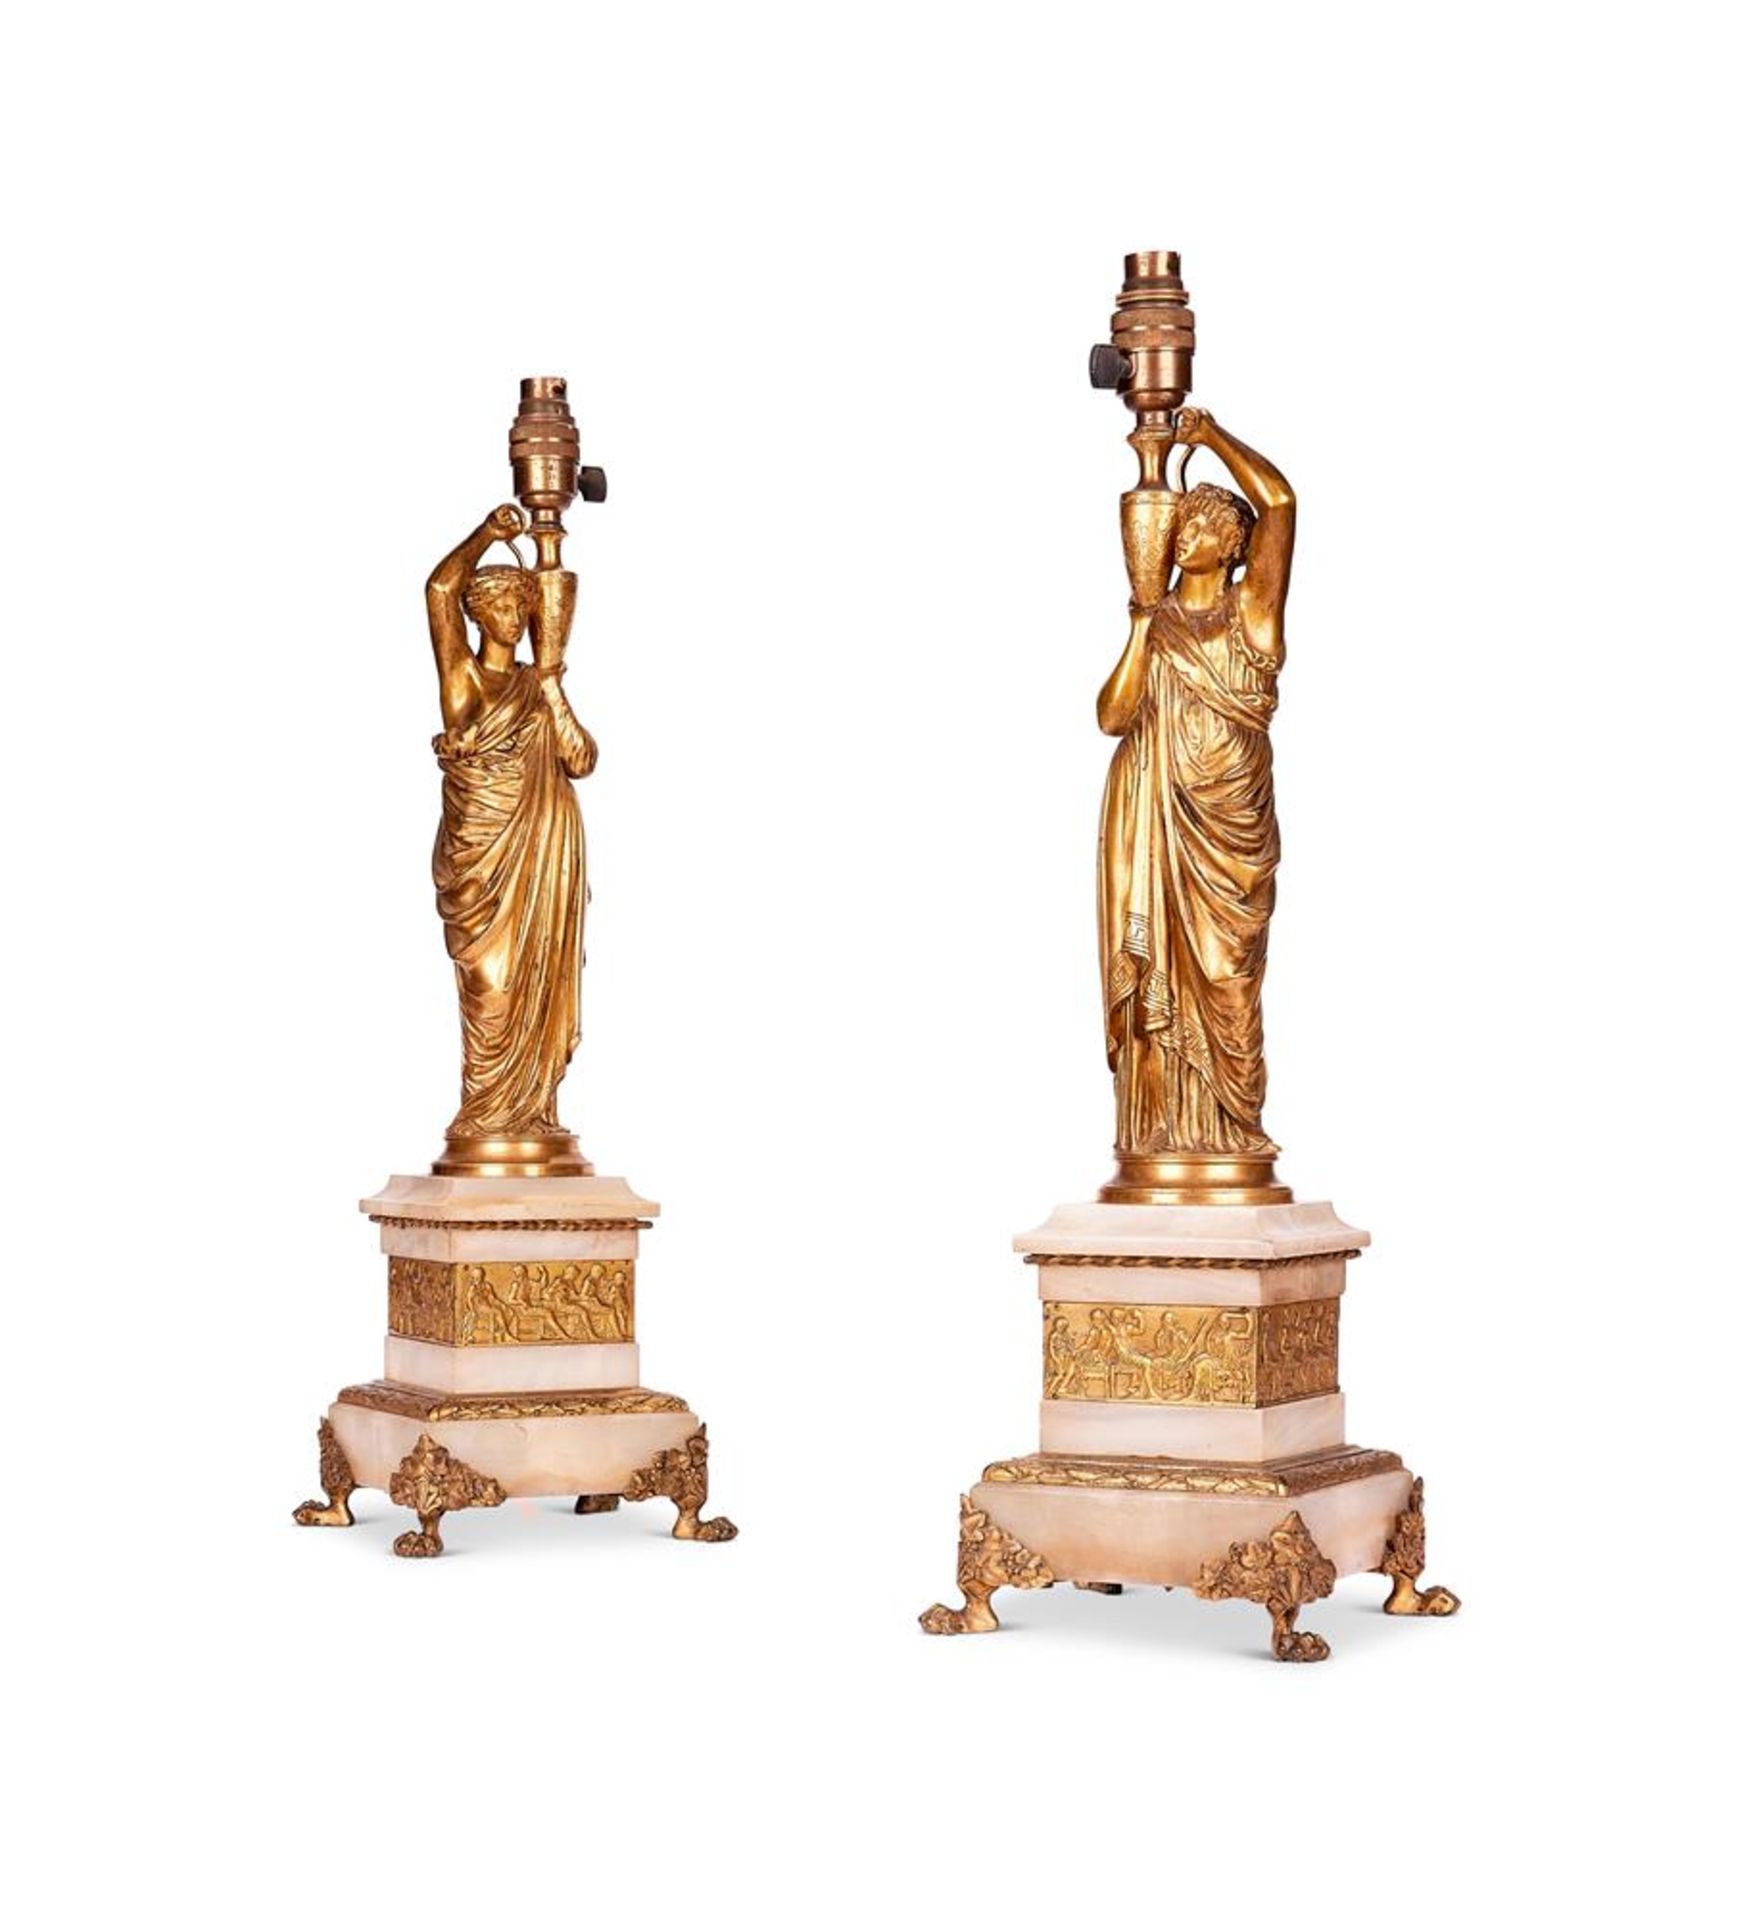 A PAIR OF ORMOLU AND ALABASTER FIGURAL TABLE LAMPS, LATE 19TH CENTURY